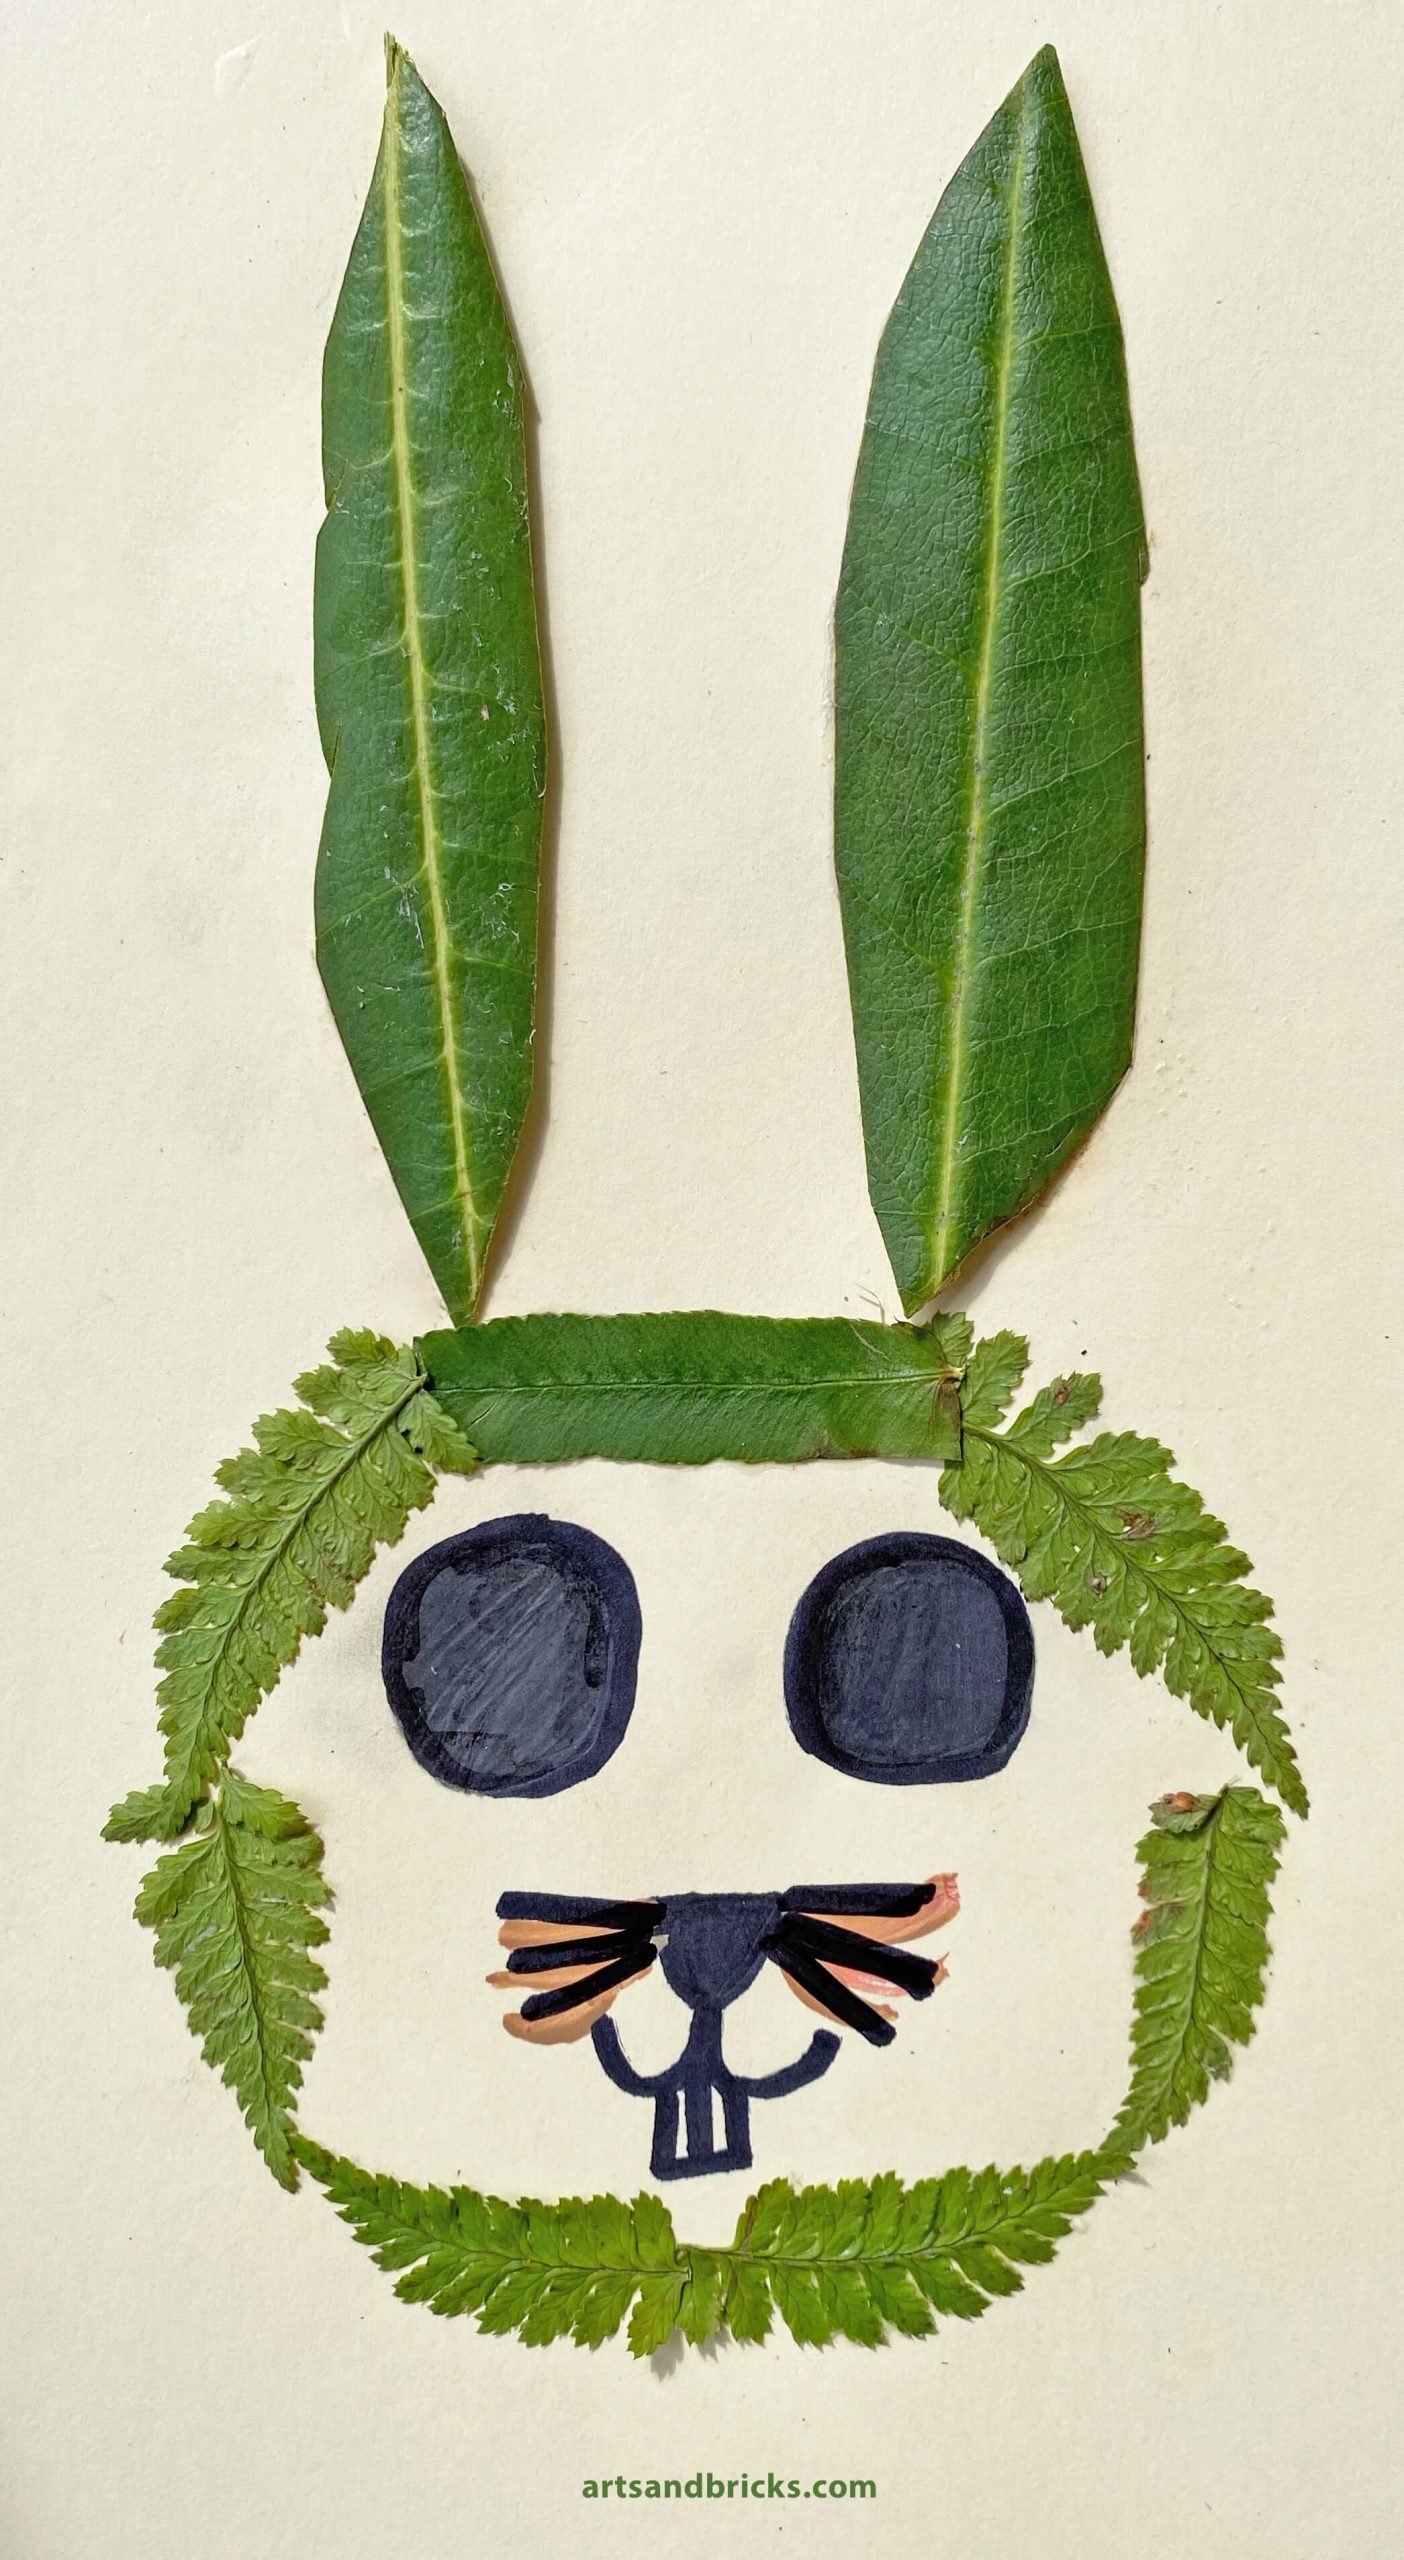 Easter Bunny Collage made from ferns and Rhododendron leaves.